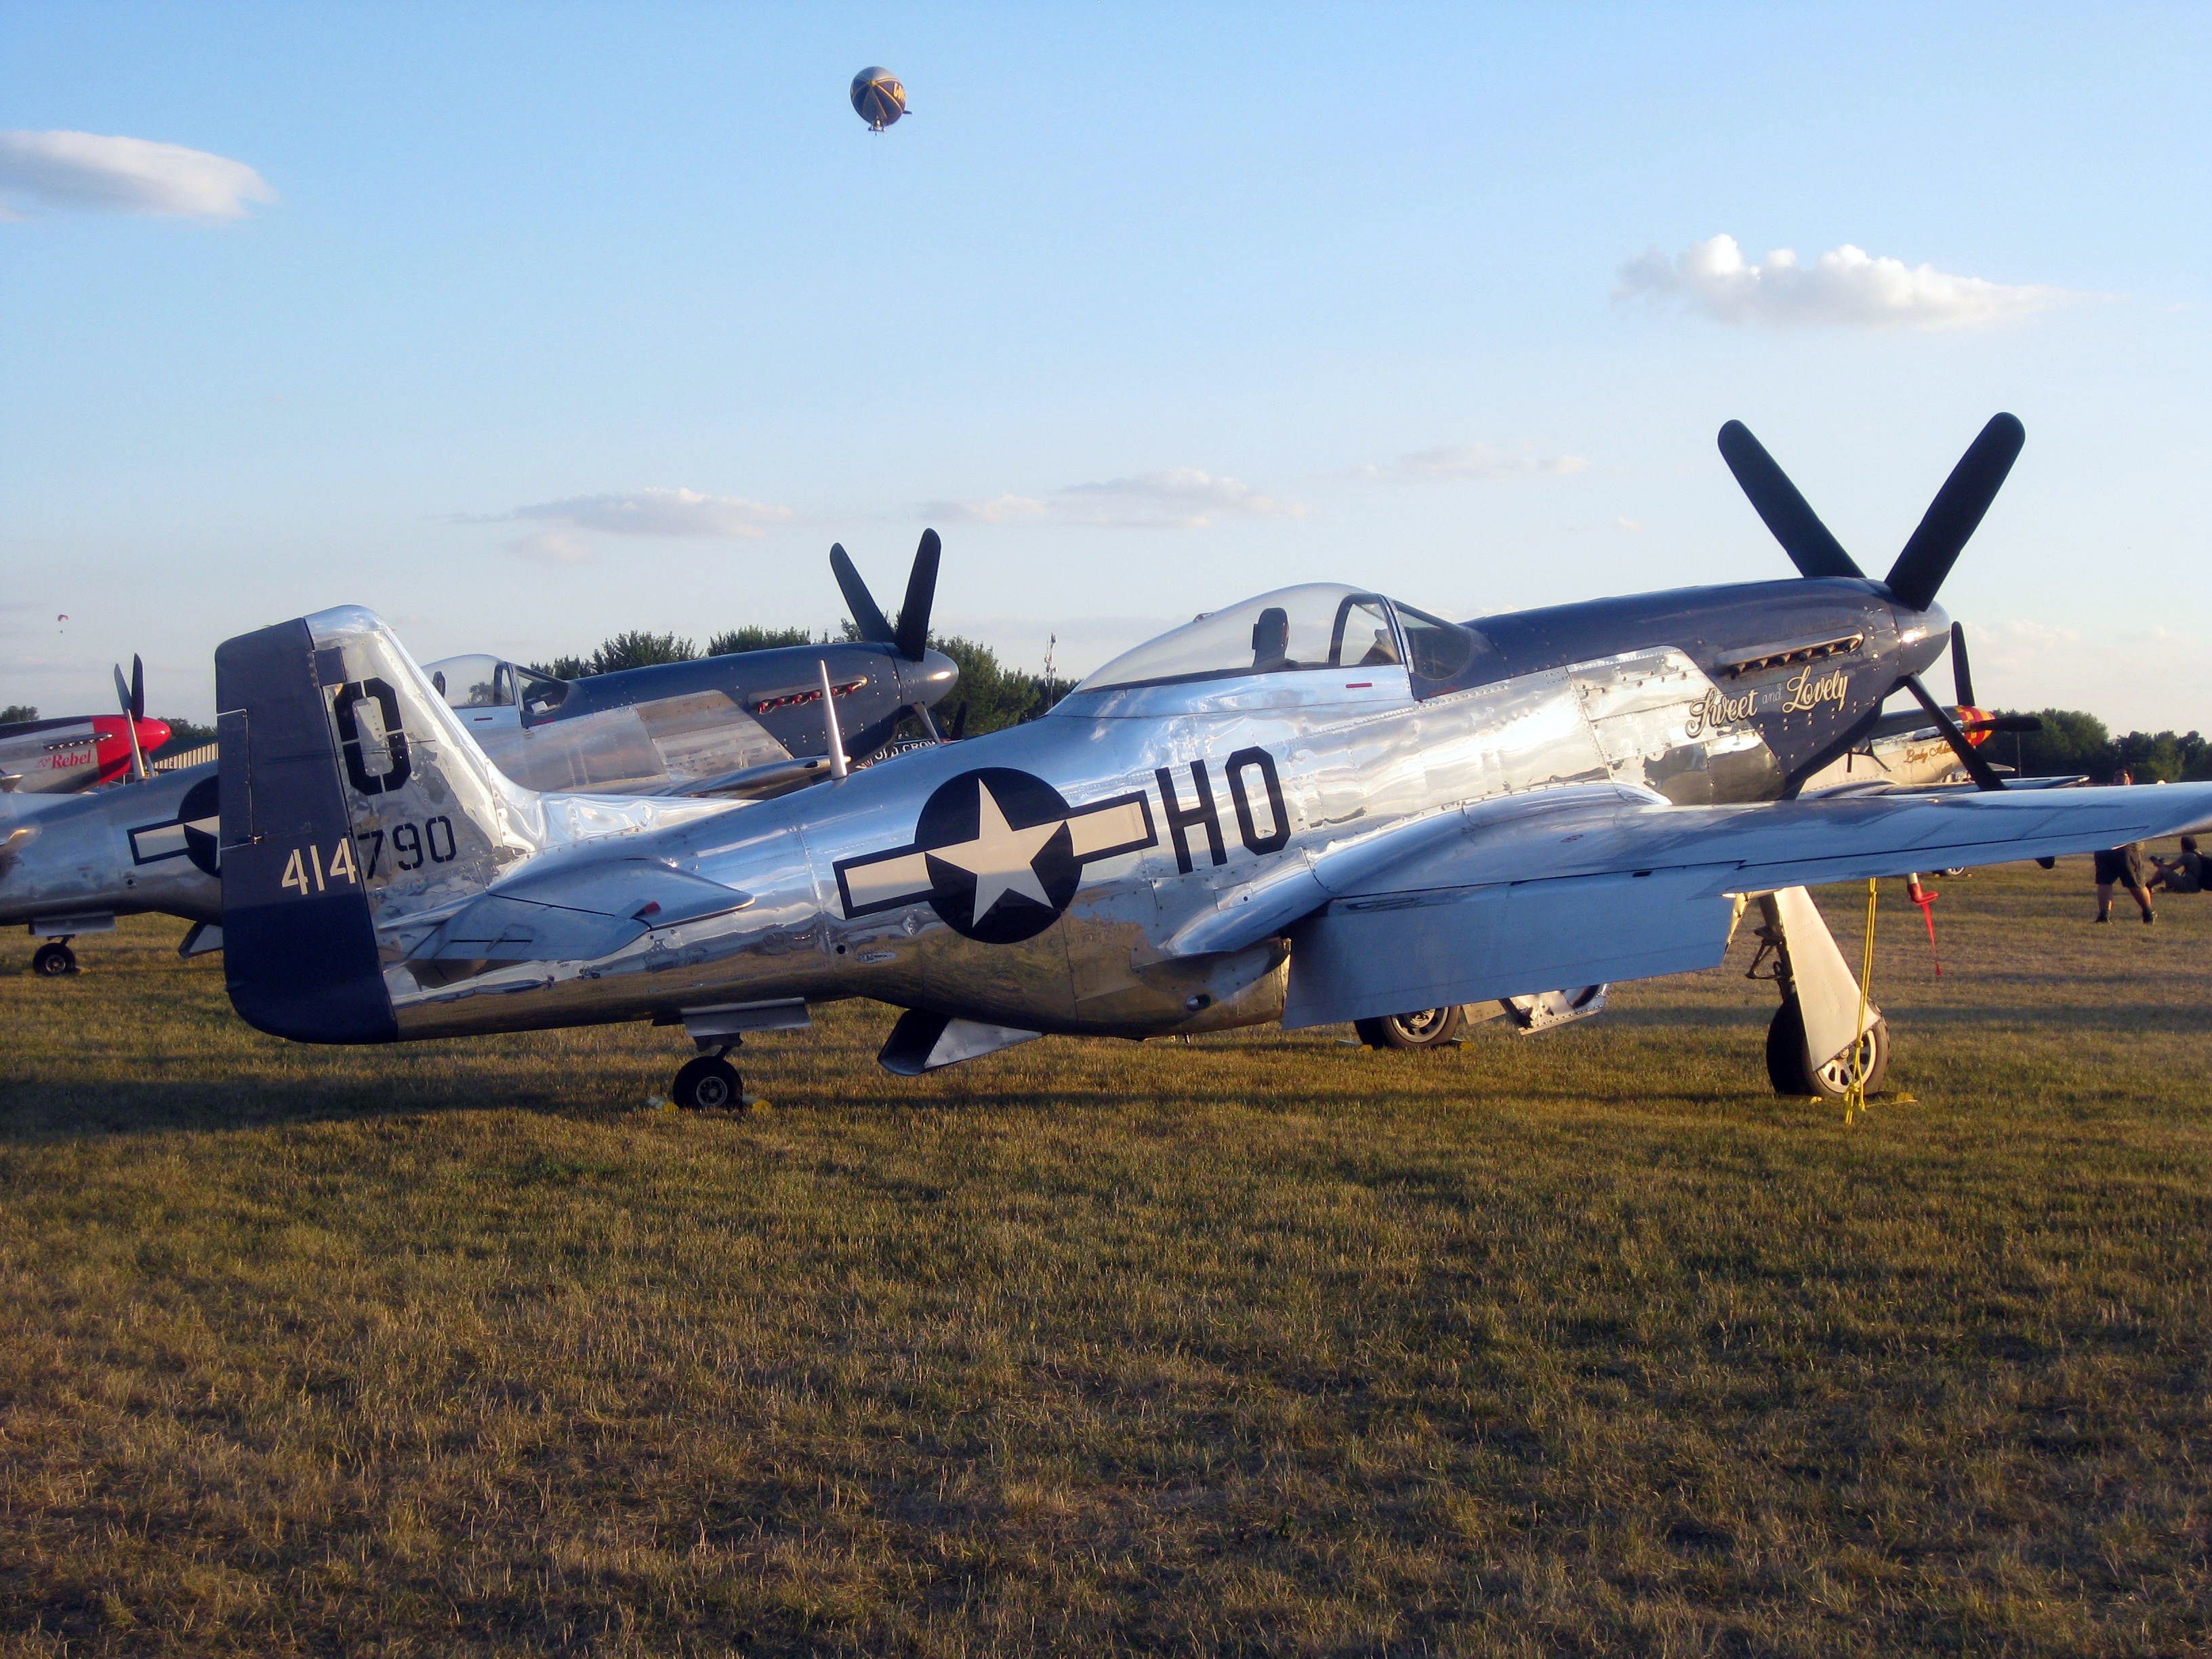 A P-51 Mustang parked in a field.